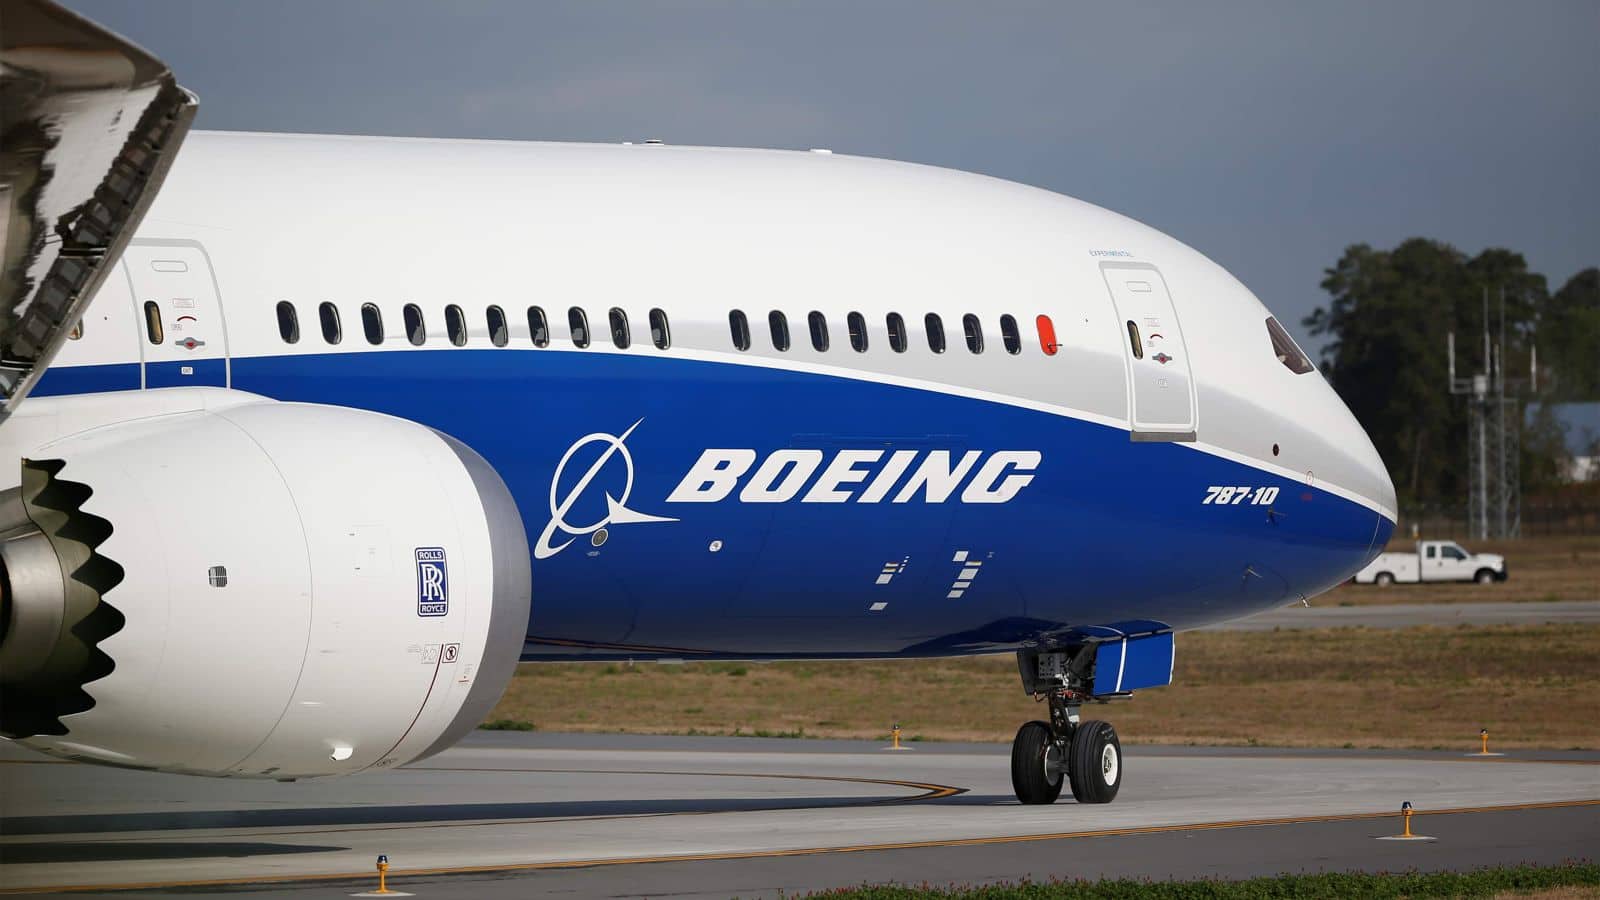 FAA investigates Boeing over 787 Dreamliner aircraft inspection doubts